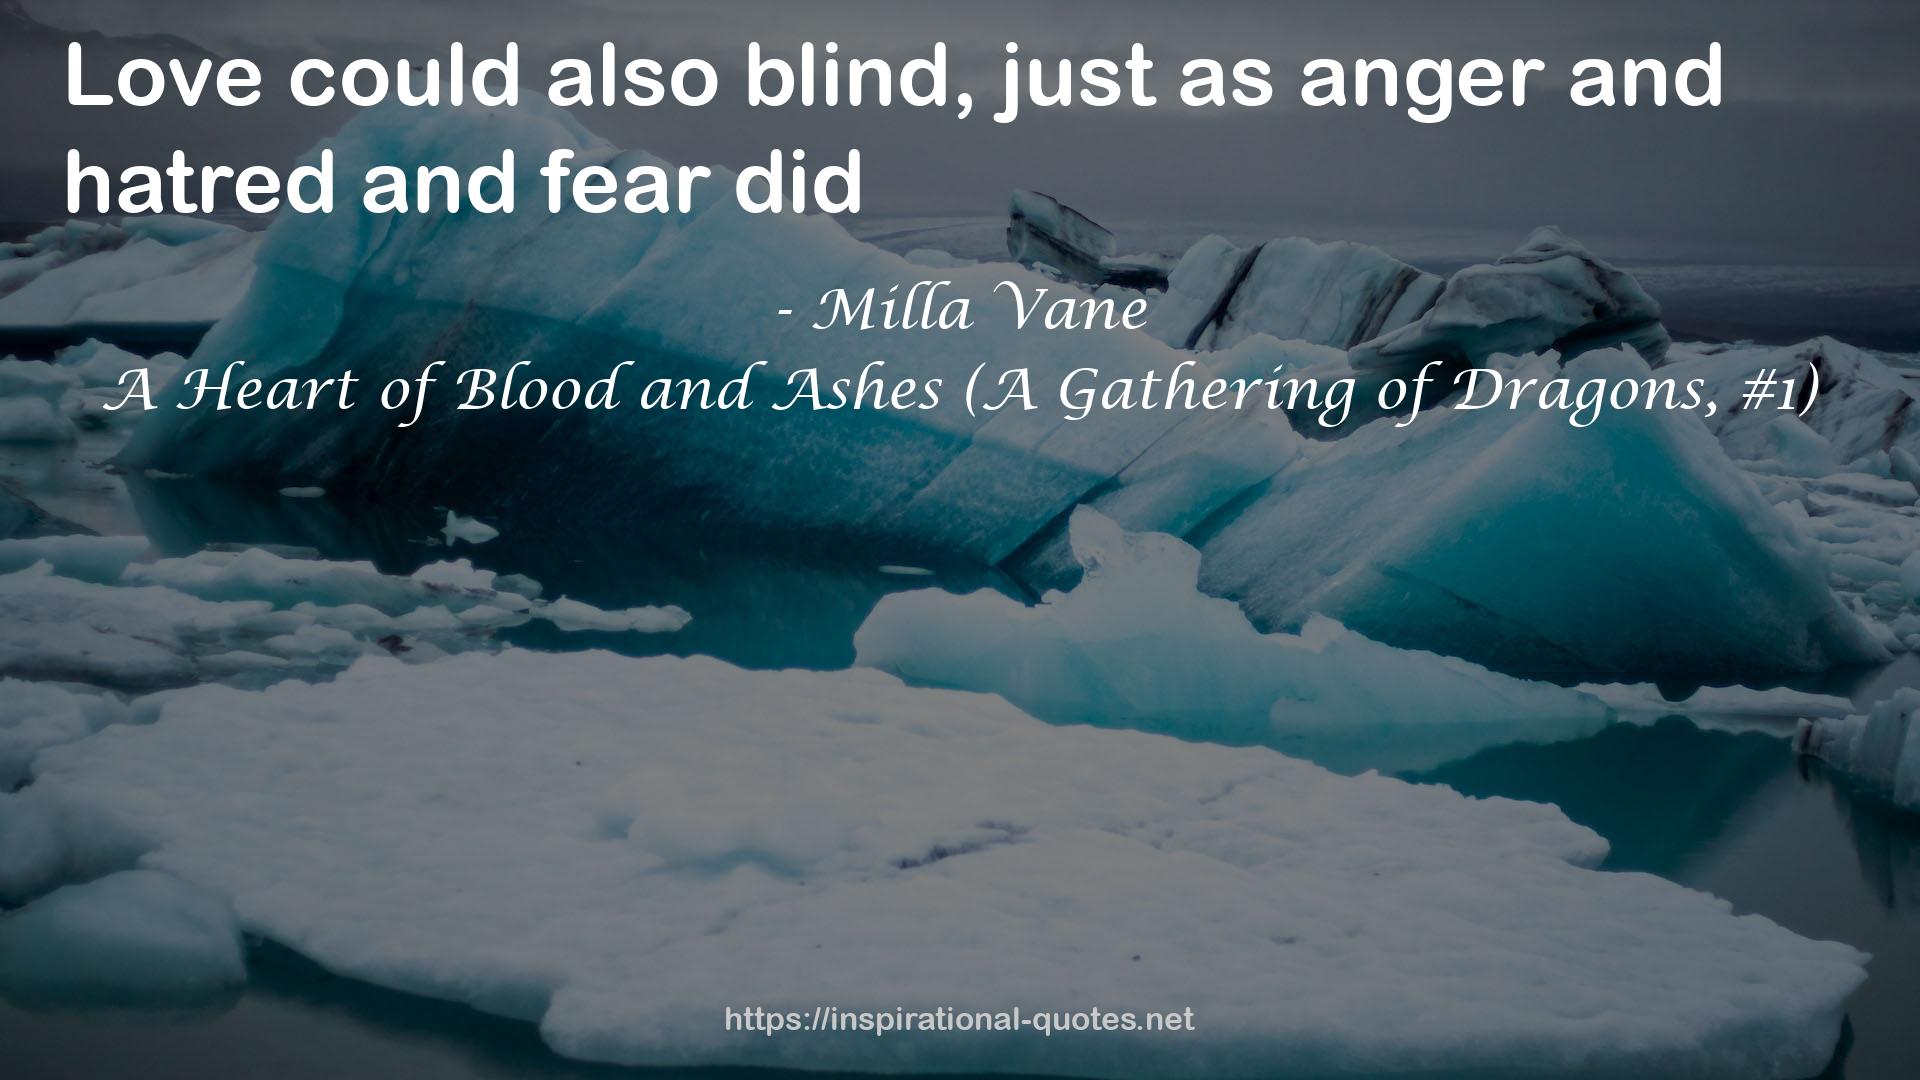 A Heart of Blood and Ashes (A Gathering of Dragons, #1) QUOTES